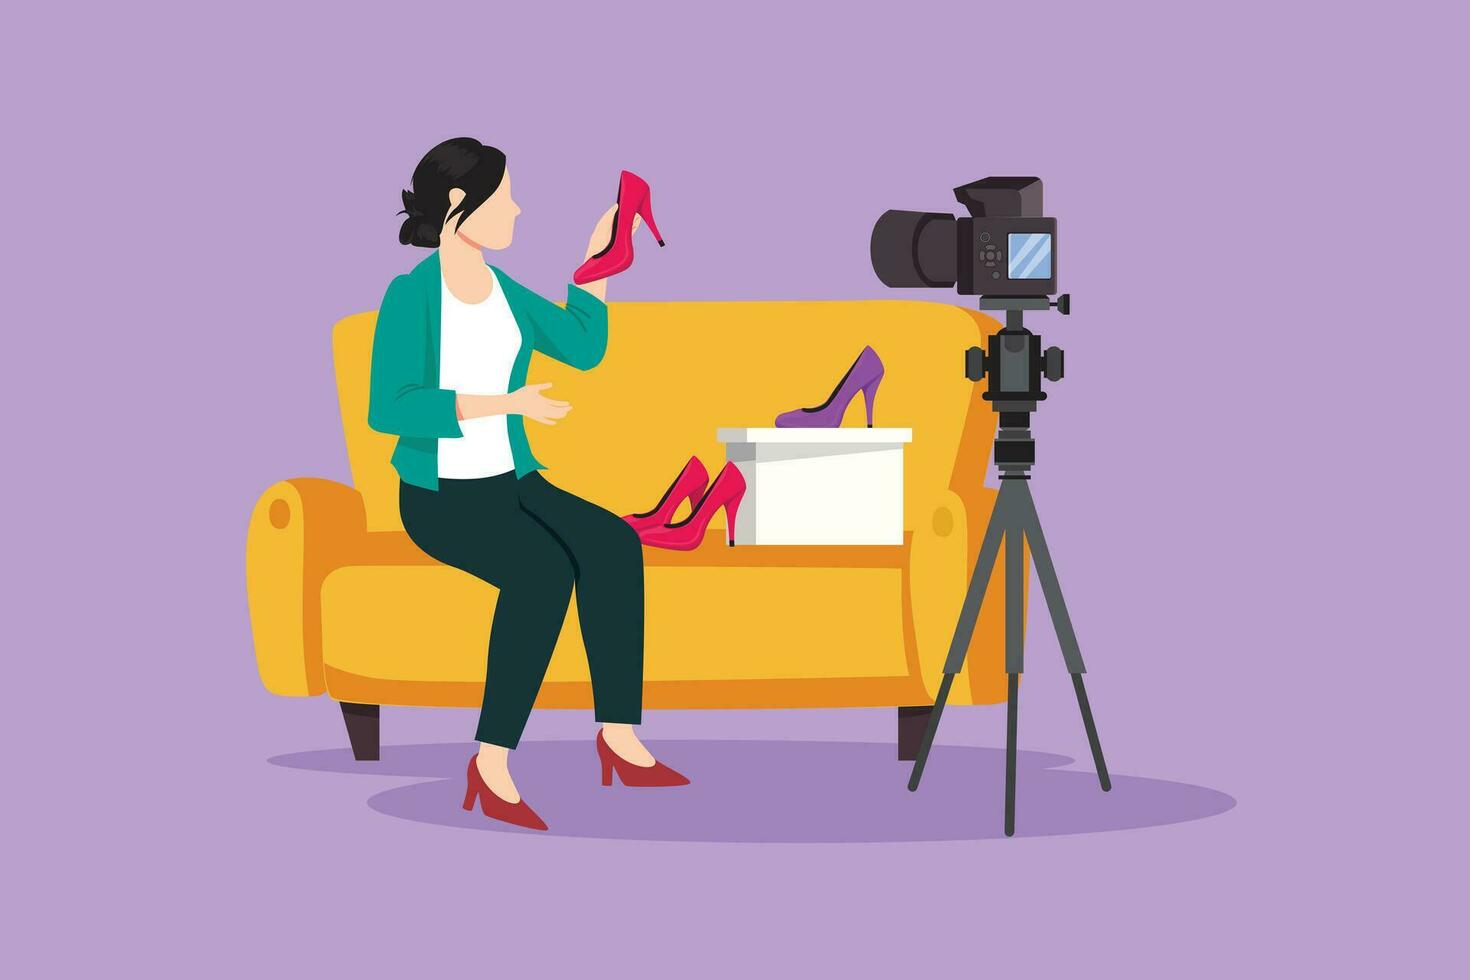 Graphic flat design drawing stylish beauty blogger woman is sitting at sofa, reviewing heels shoe in her hands while recording video with digital camera and tripod. Cartoon style vector illustration